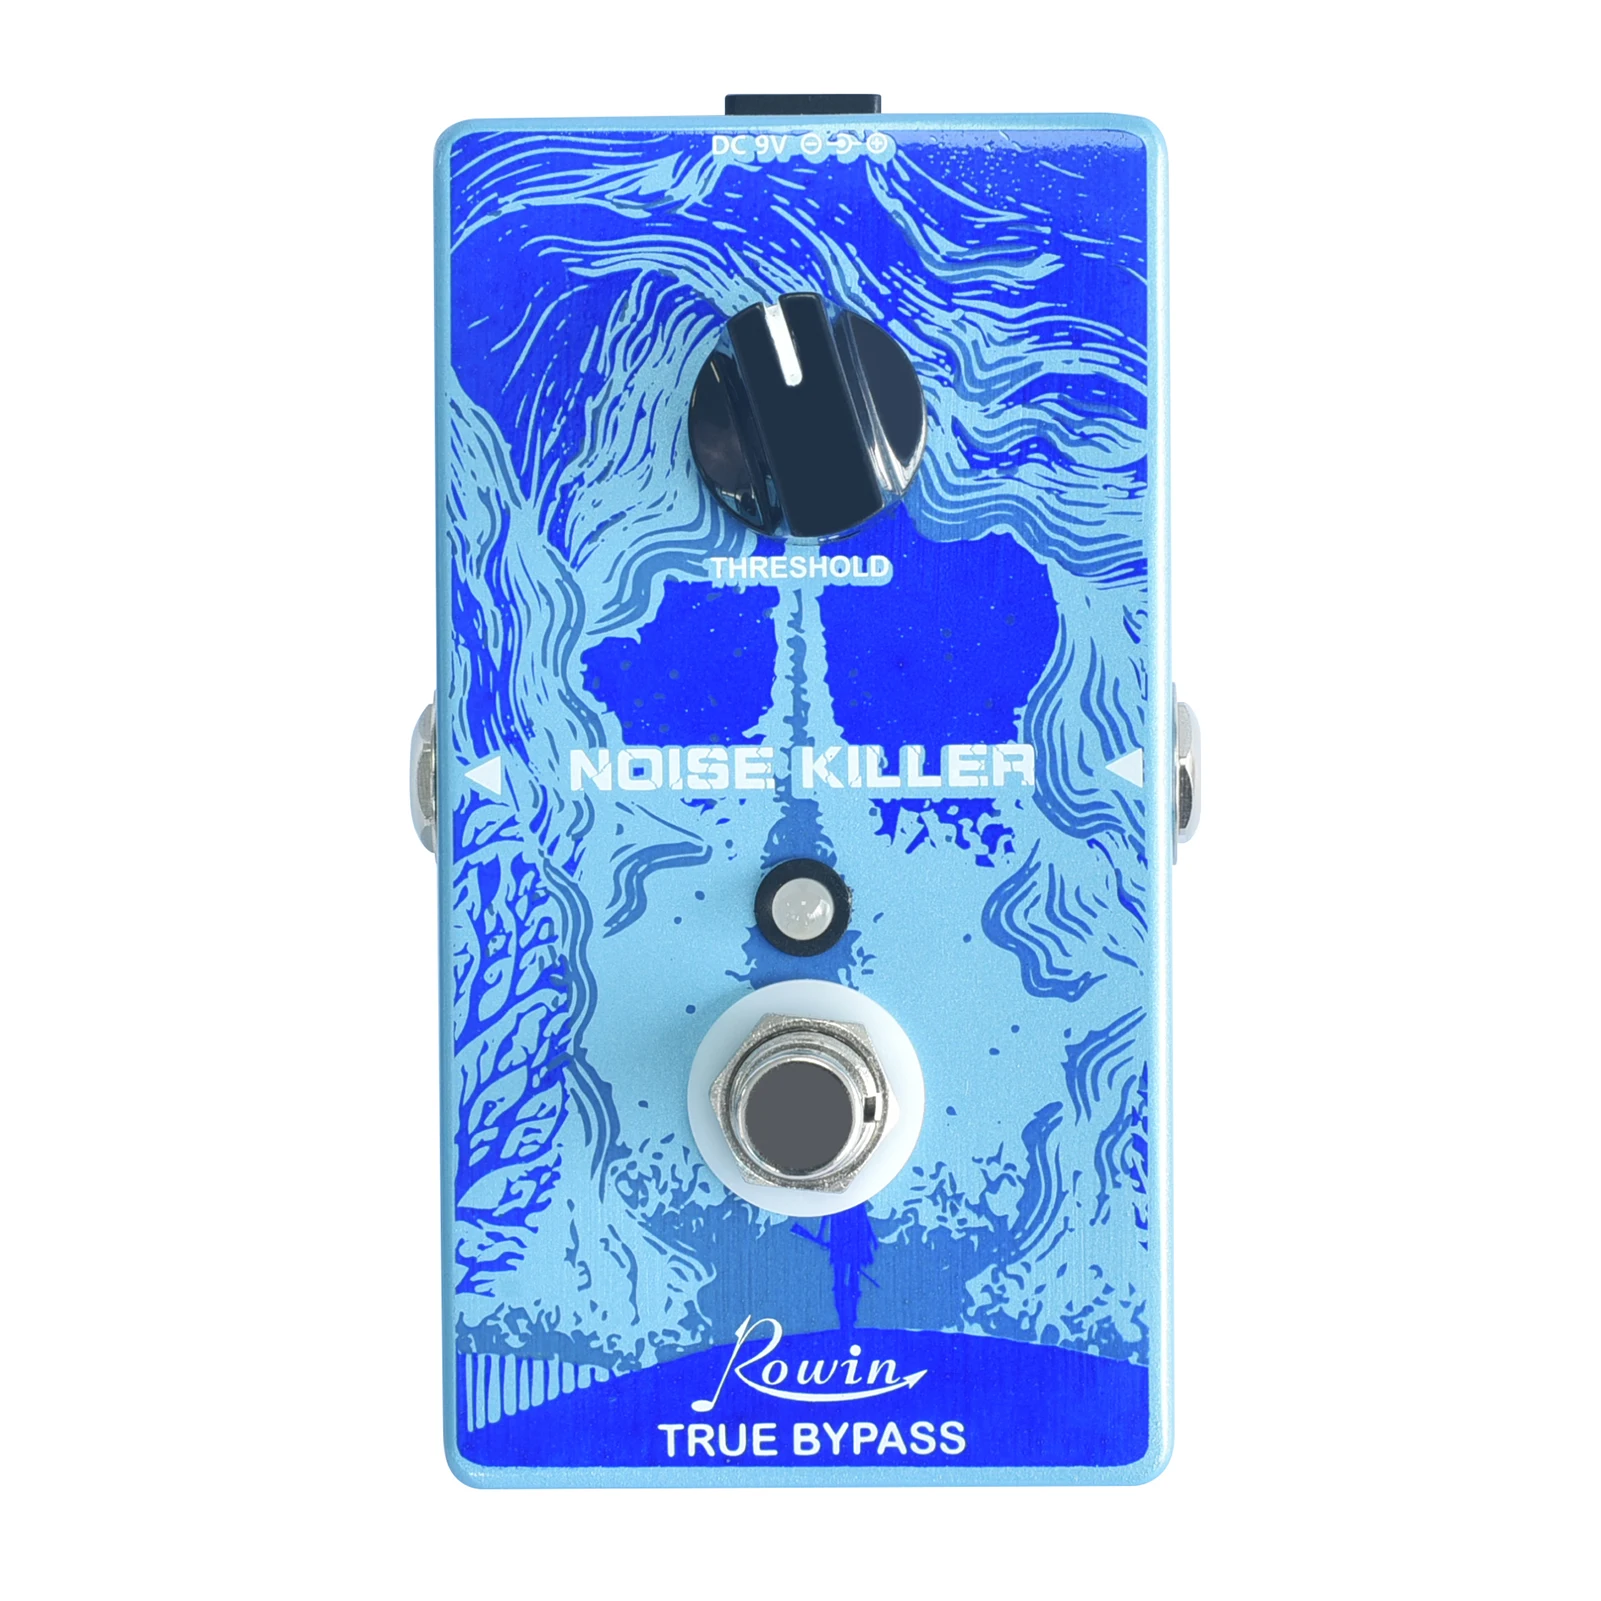 

Rowin RE-03 Noise Killer Pedal True Bypass Noise Gate Guitar Effect Pedals with Threshold Control Knob for Electric Guitar Bass